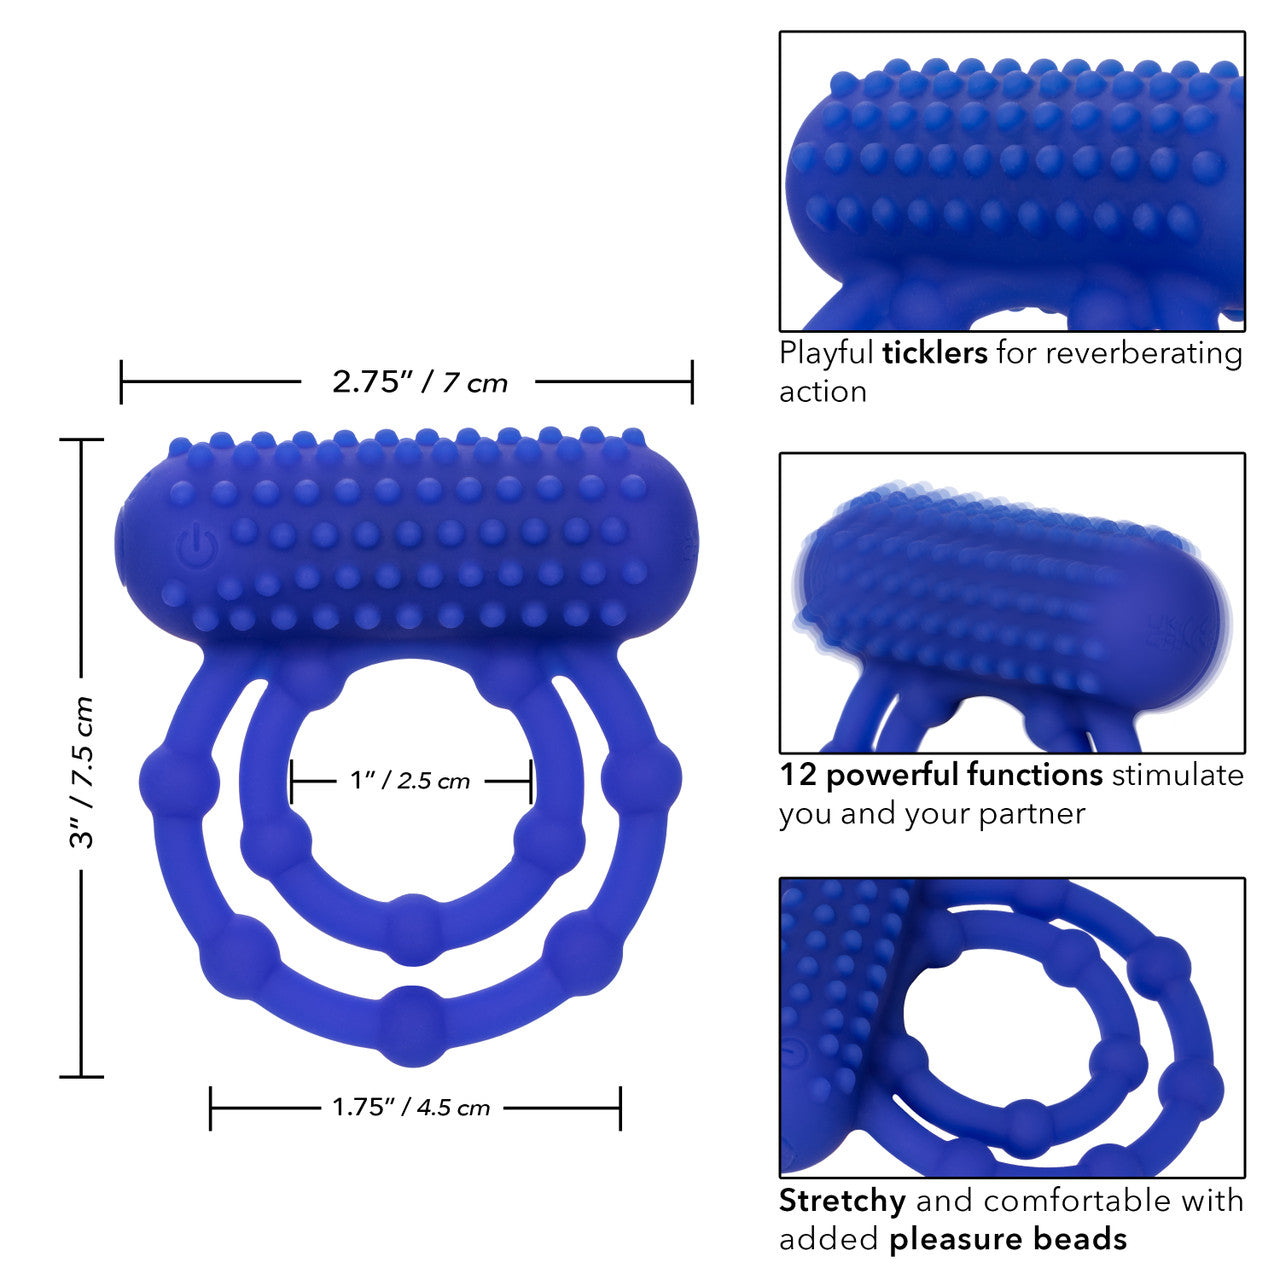 Silicone Rechargeable 10 Bead Maximus® Ring